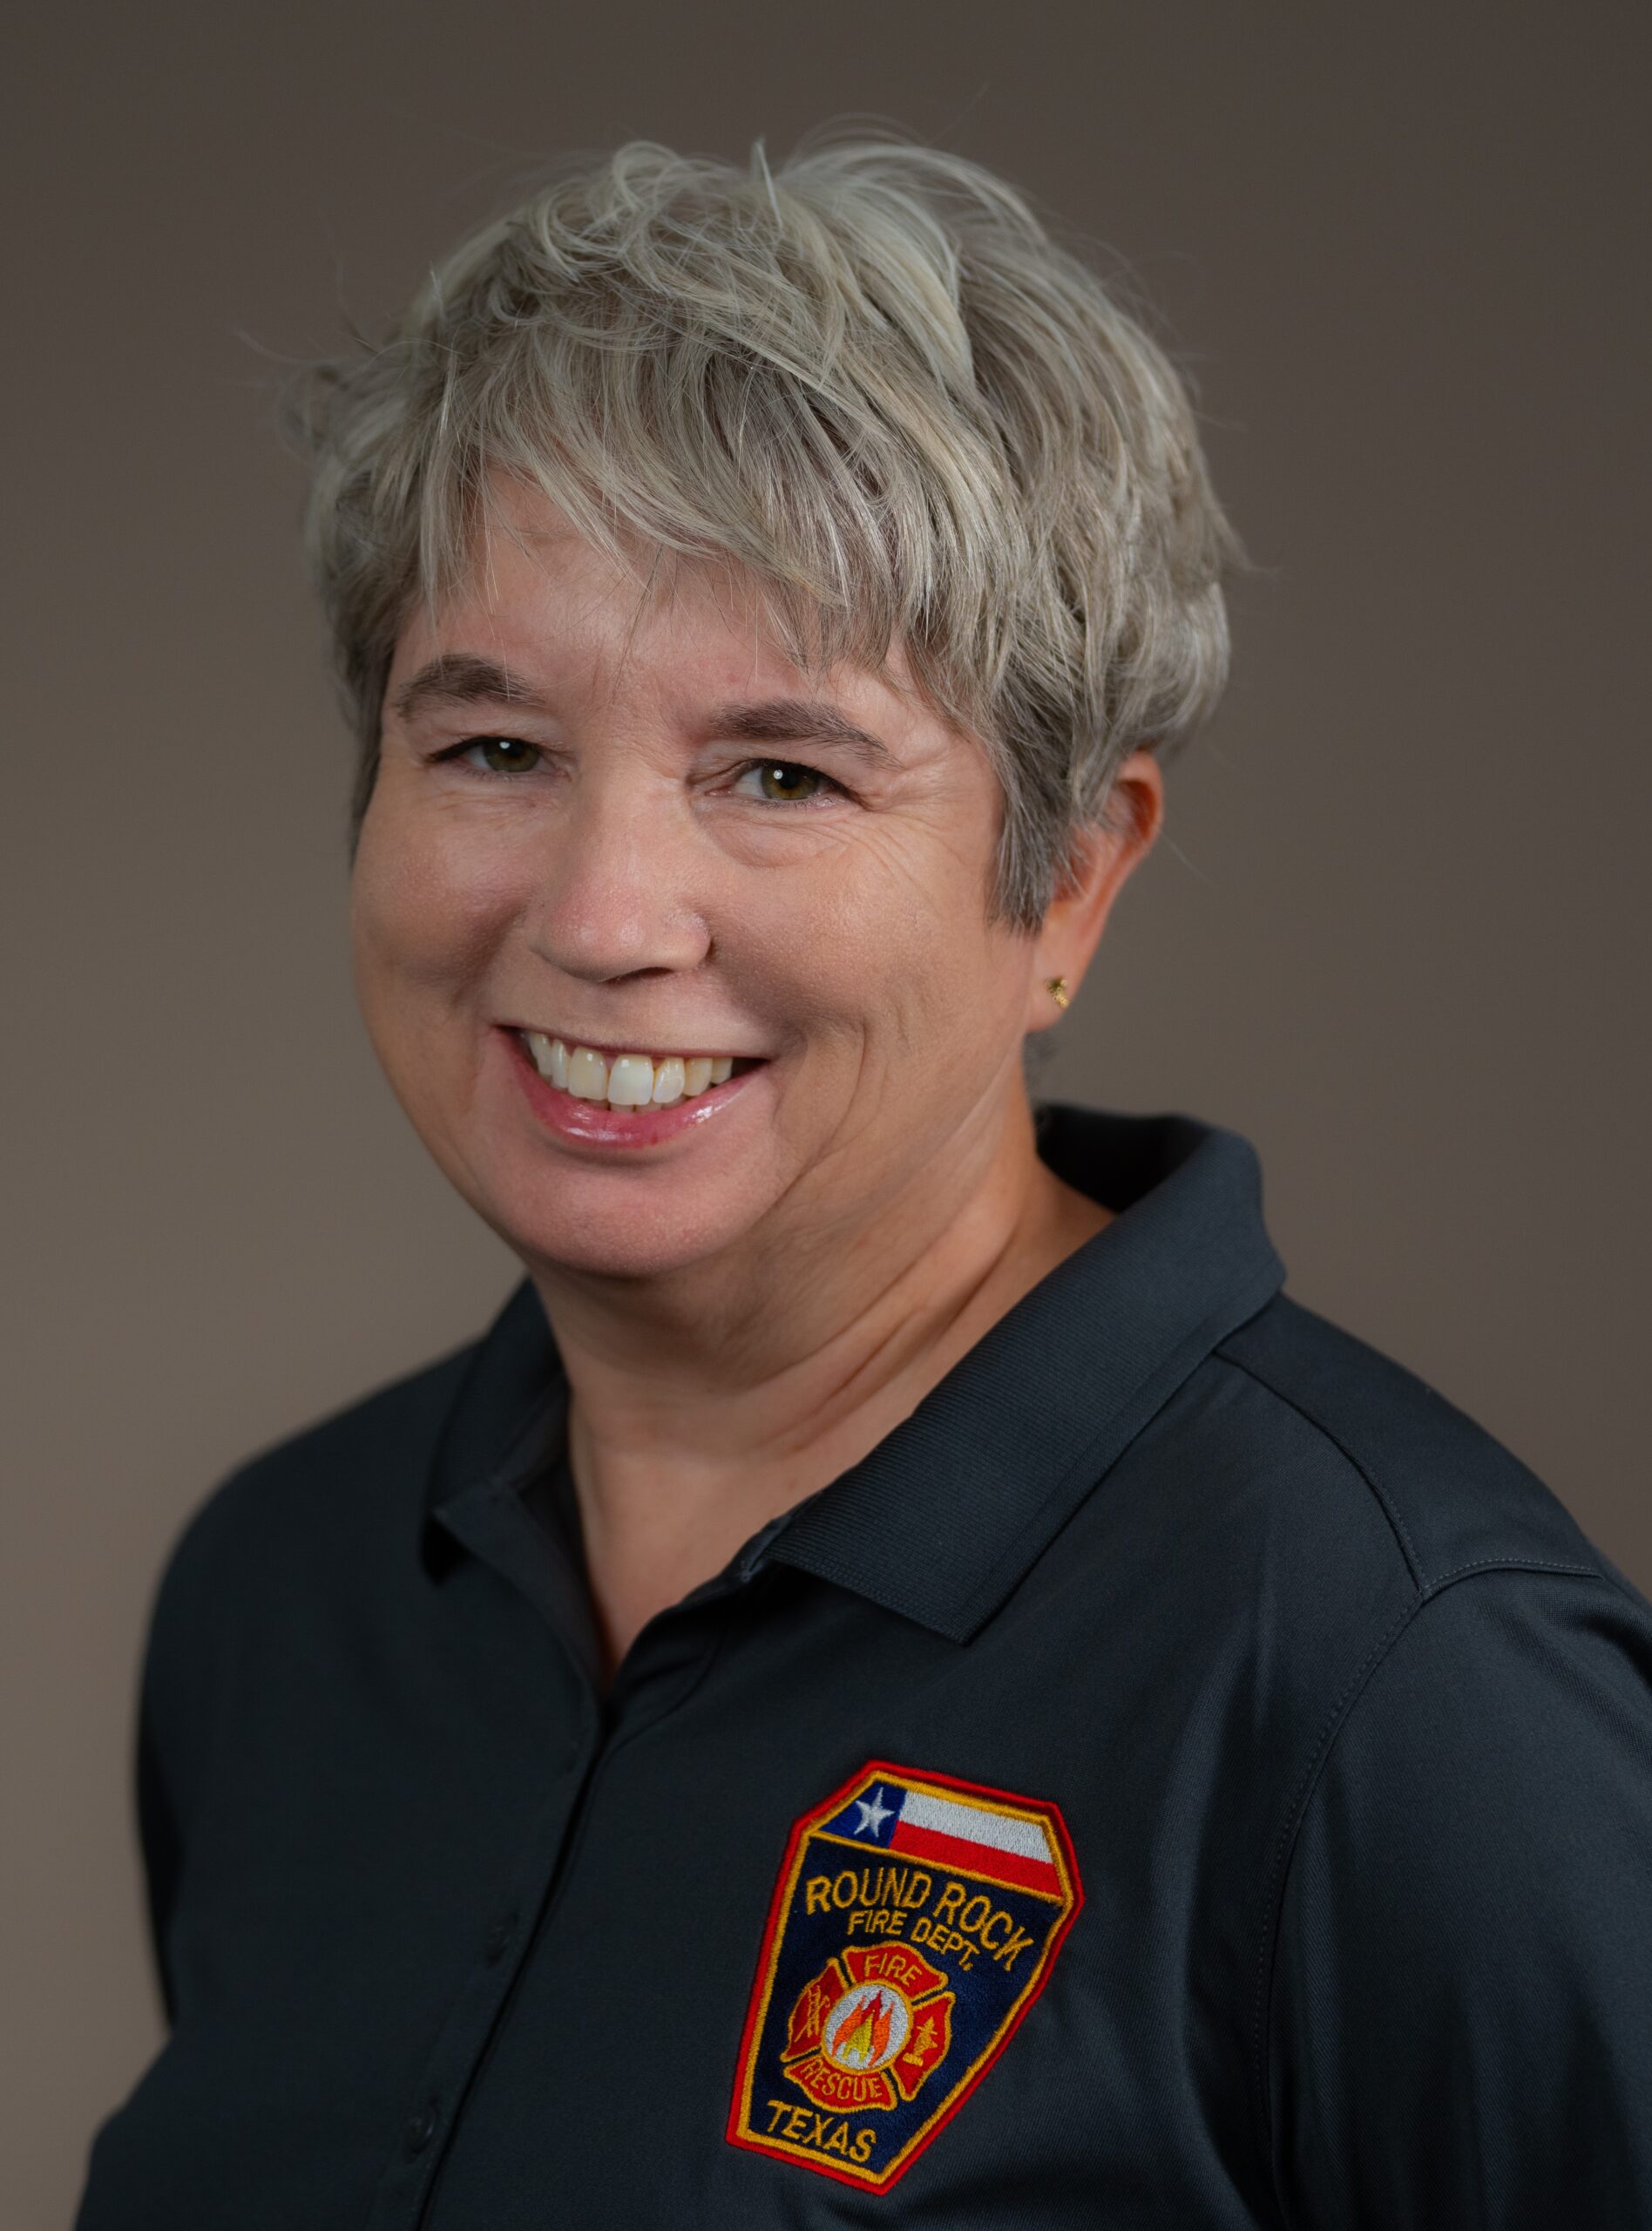 headshot of Annie Burwell, Commission member and program manager of a Crisis Response Unit in Round Rock, Texas